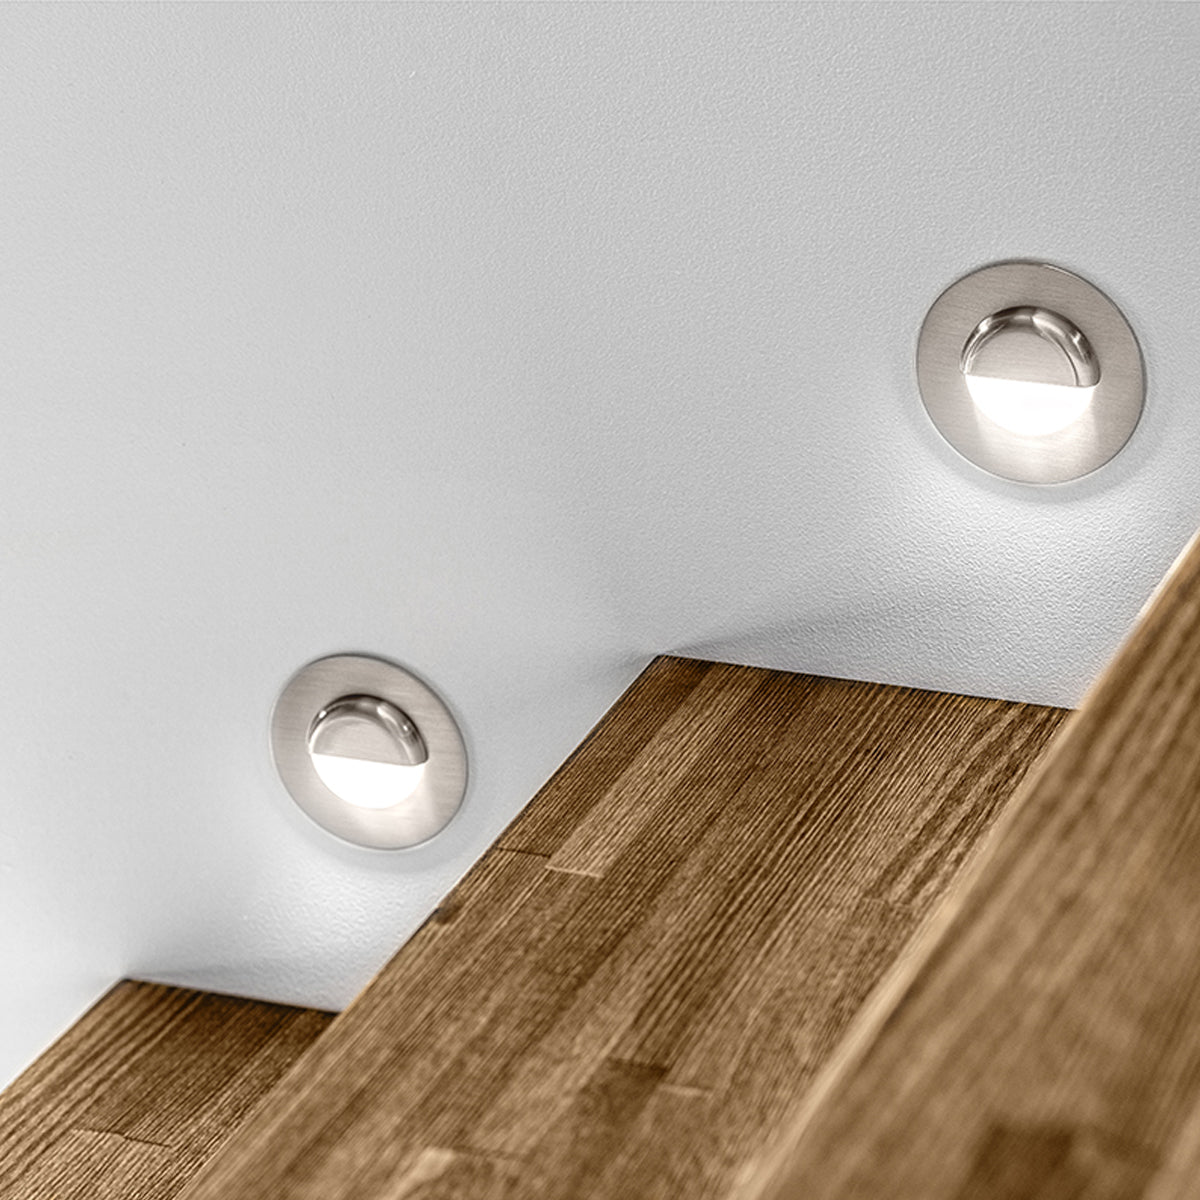 Casey is a small led light  that can be mounted on the wall or even the floor. Ideal for stair lighting. It is made of stainless steel and finished with an opal diffuser. It has an IP20 protection which means it is dustproof. Intended for indoor use.